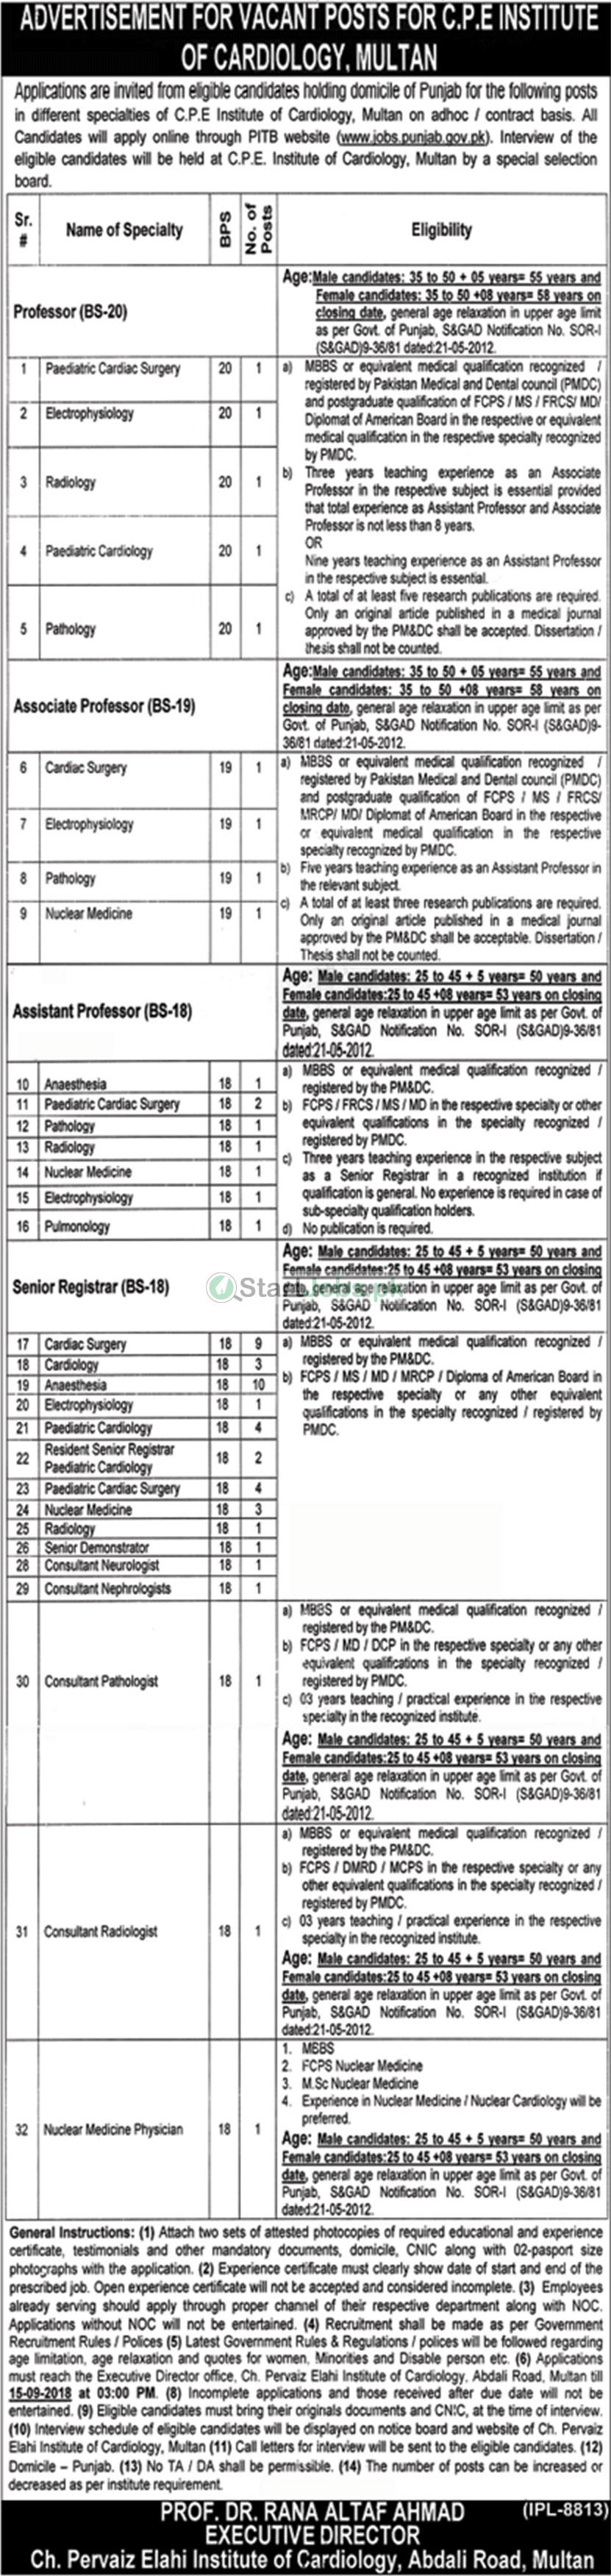 CPE Institute of Cardiology Multan 50+ Jobs 2018 For Professors, Registrars & Others